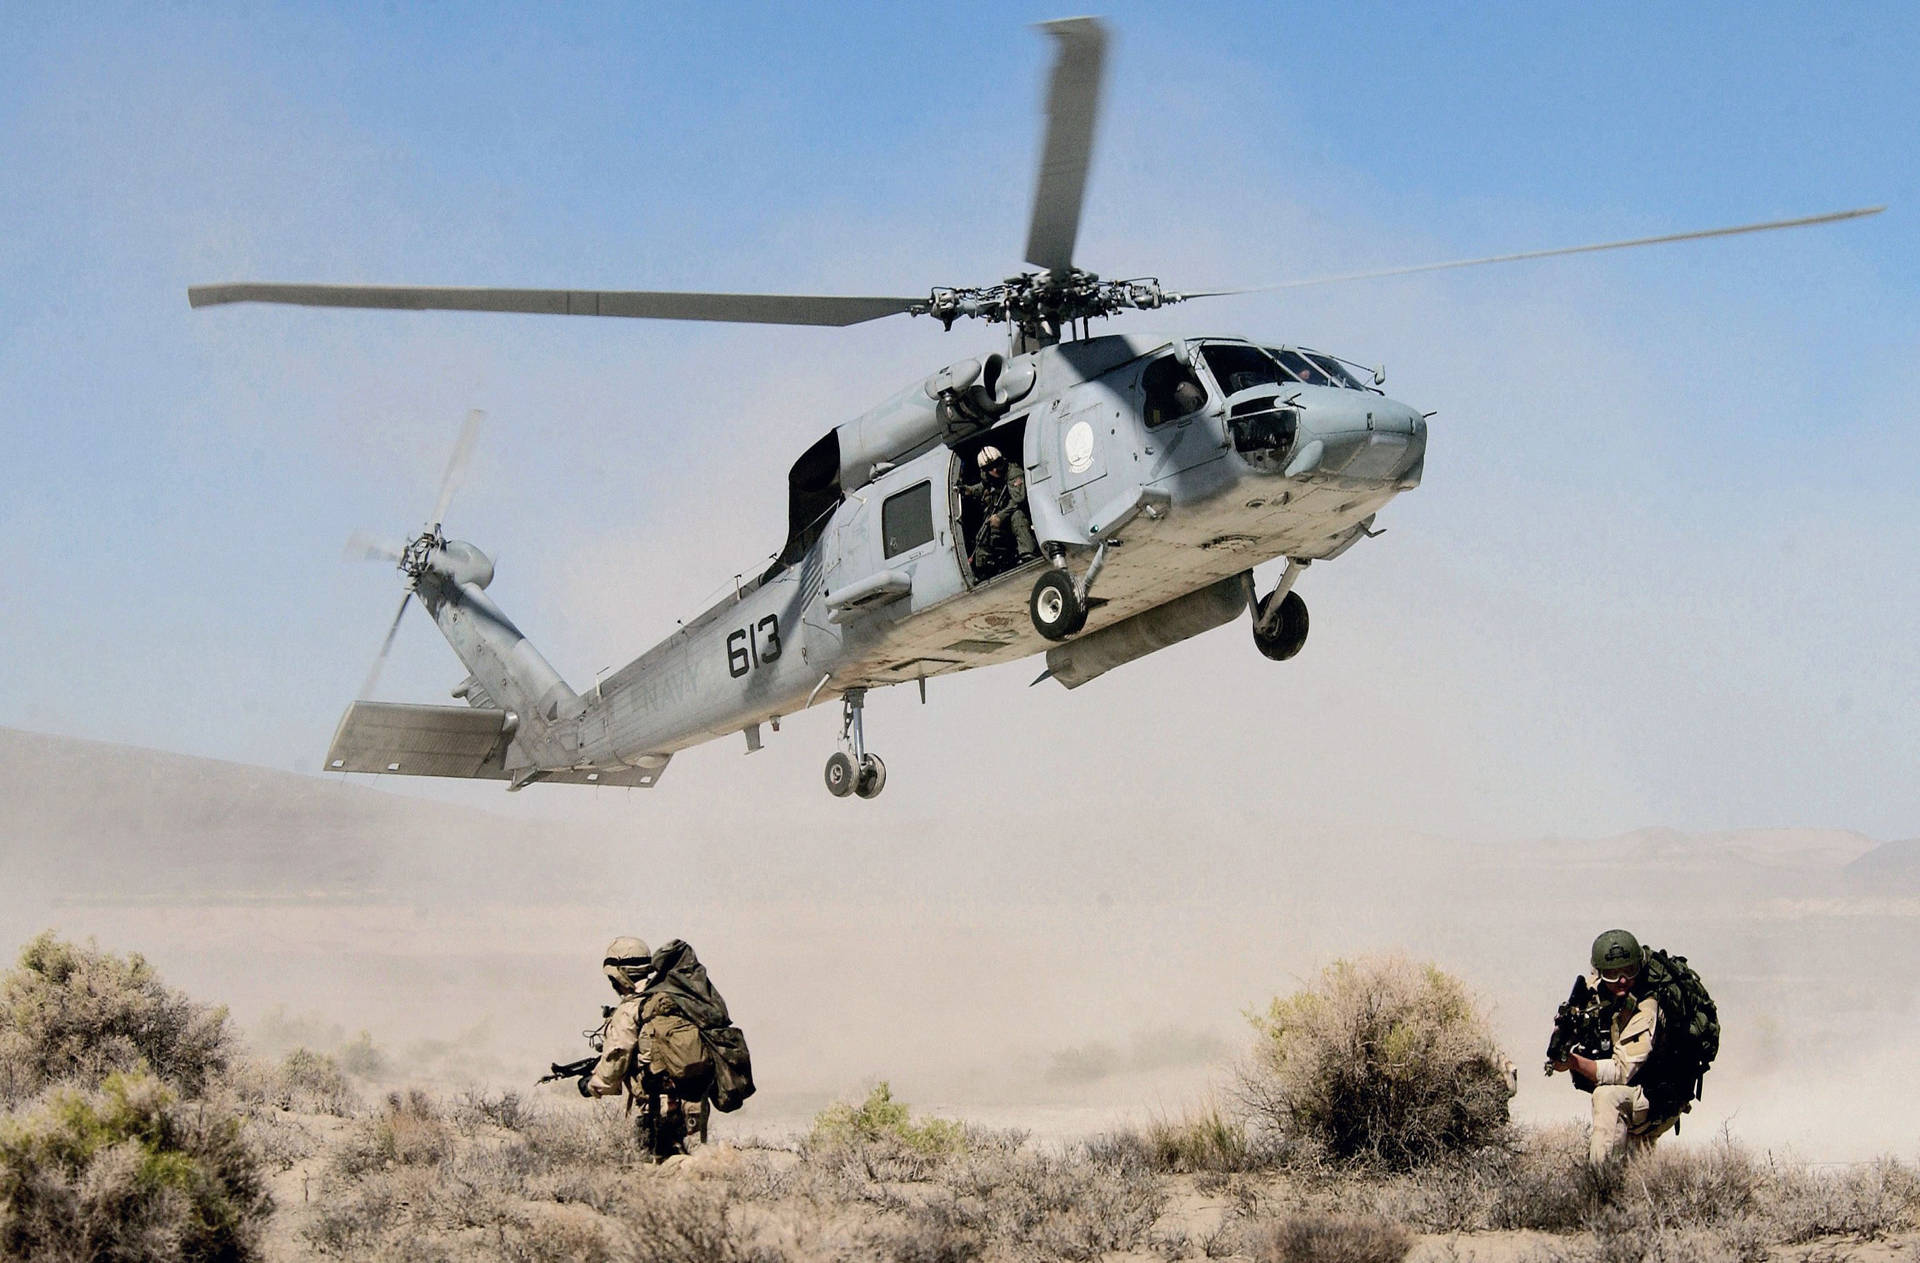 A Helicopter Is Flying Over A Group Of Soldiers Wallpaper